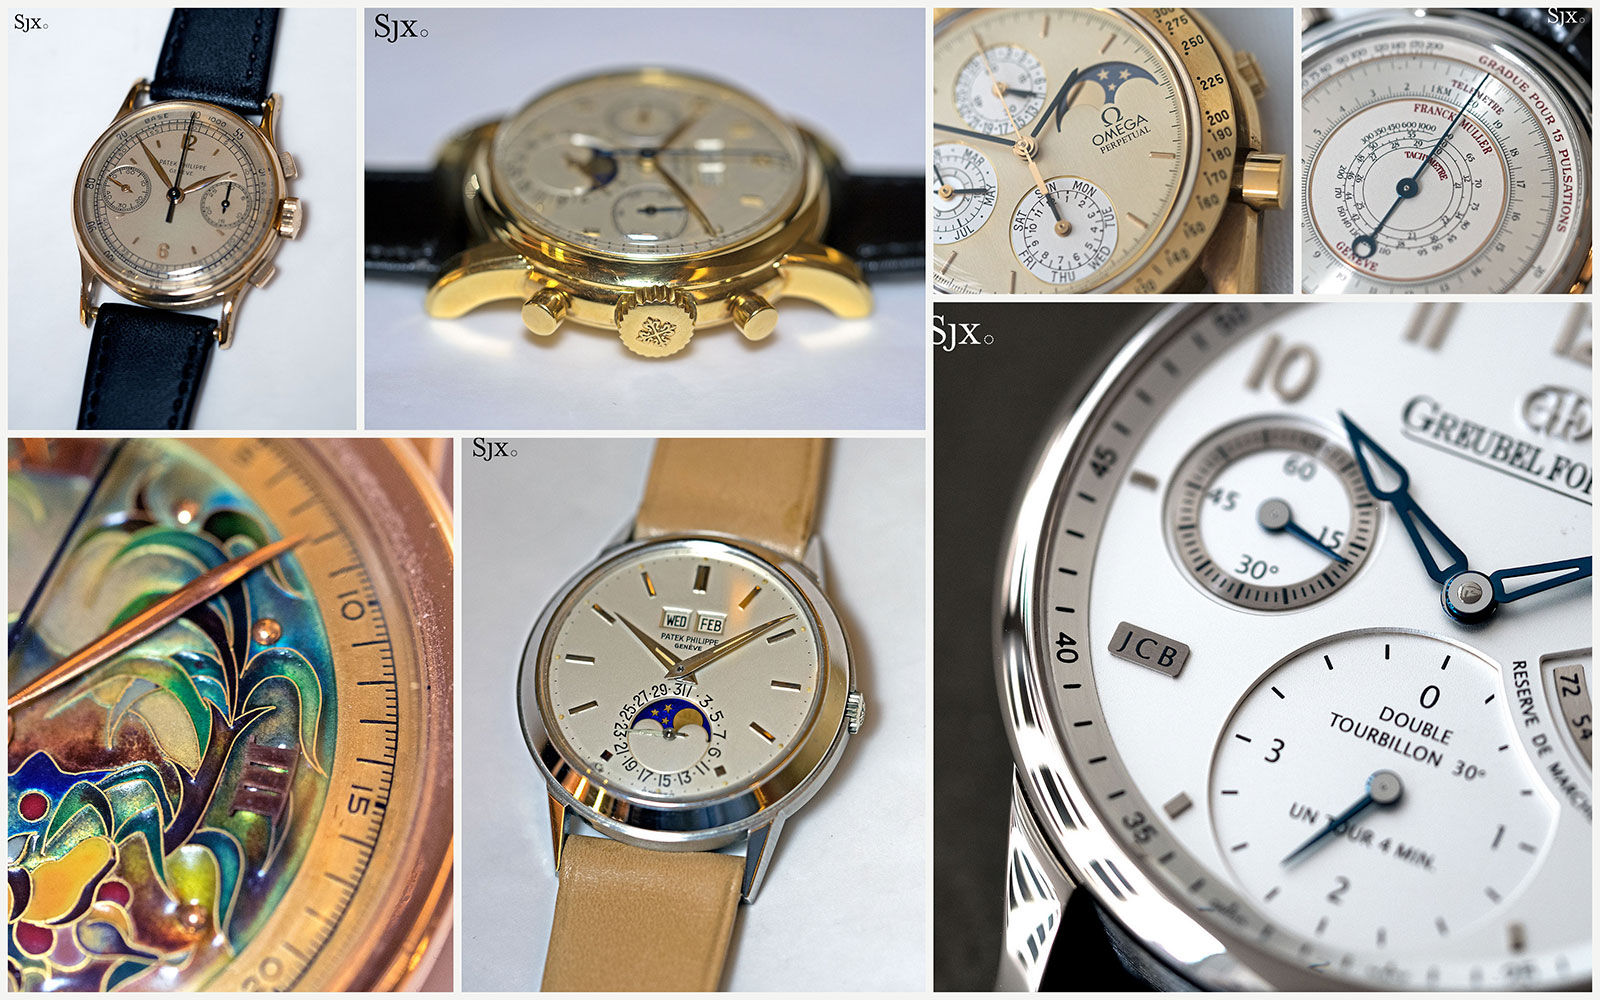 Jean-Claude Biver Selling Four Patek Philippe Watches From His